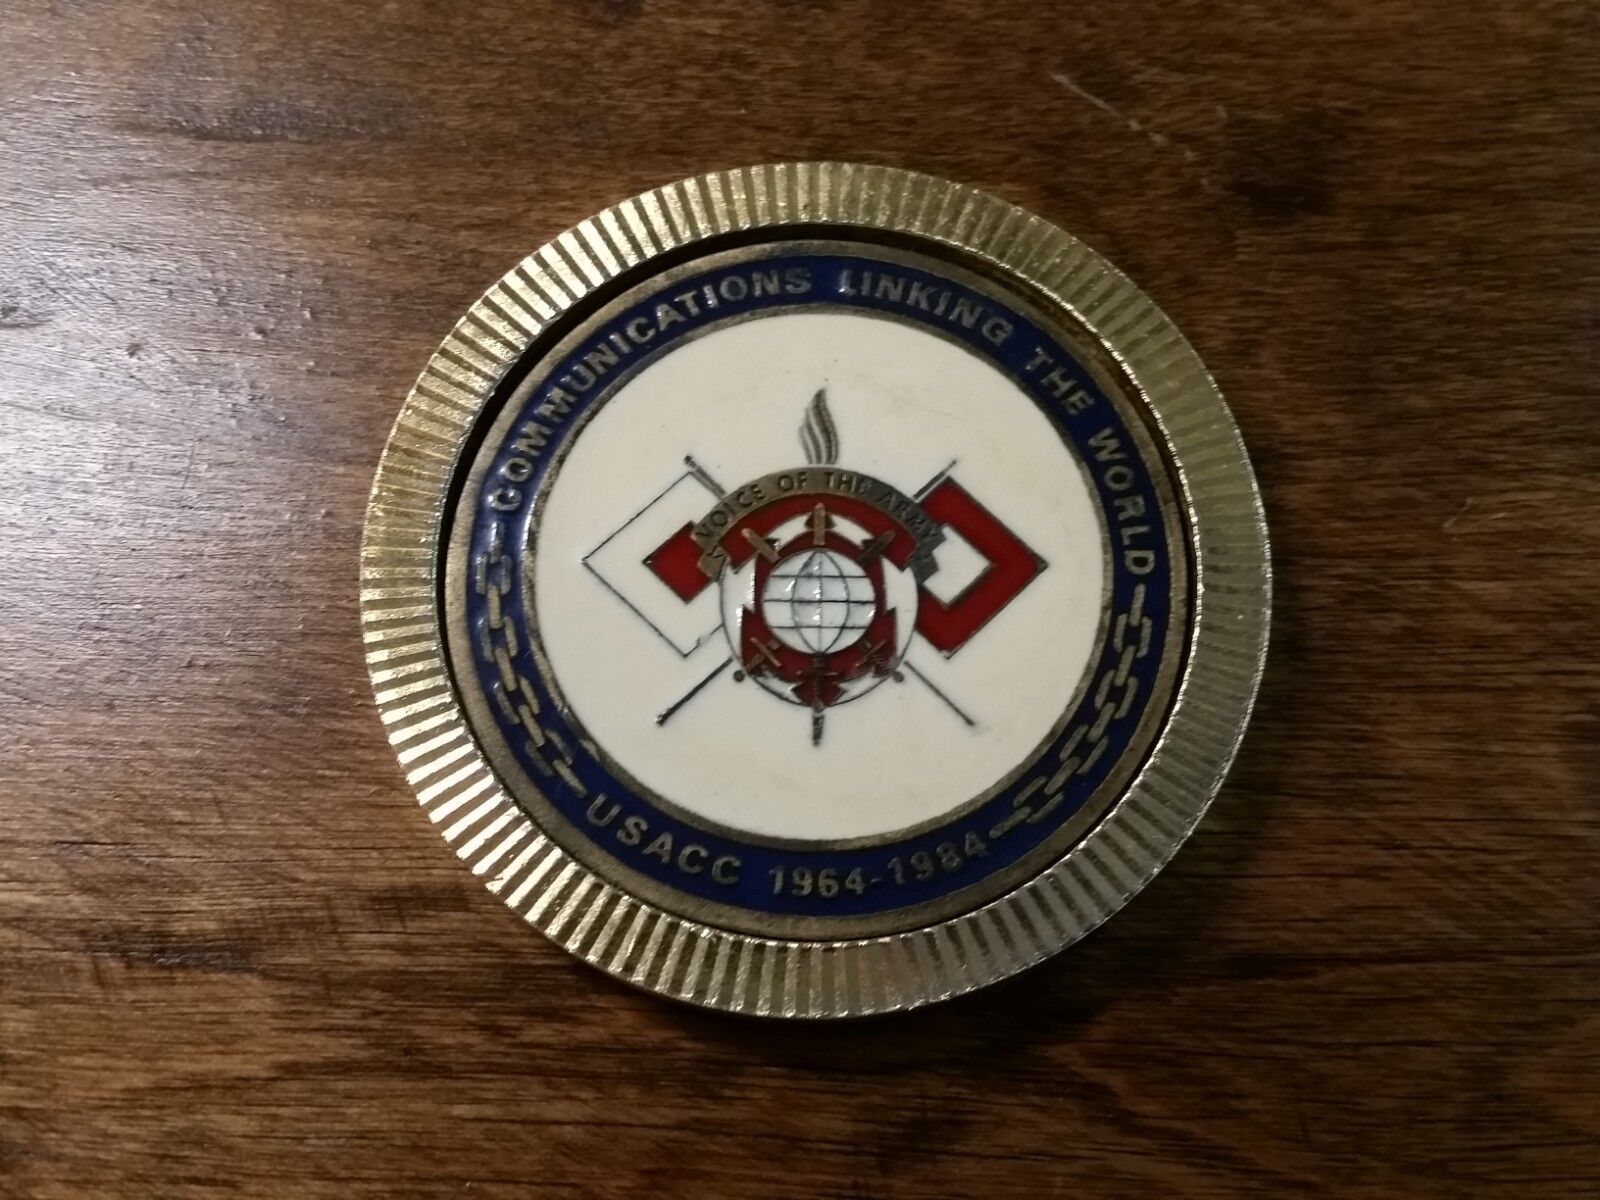 Vintage US Army Signal Corps USACC Paper Weight Coaster USACC 1964-1984